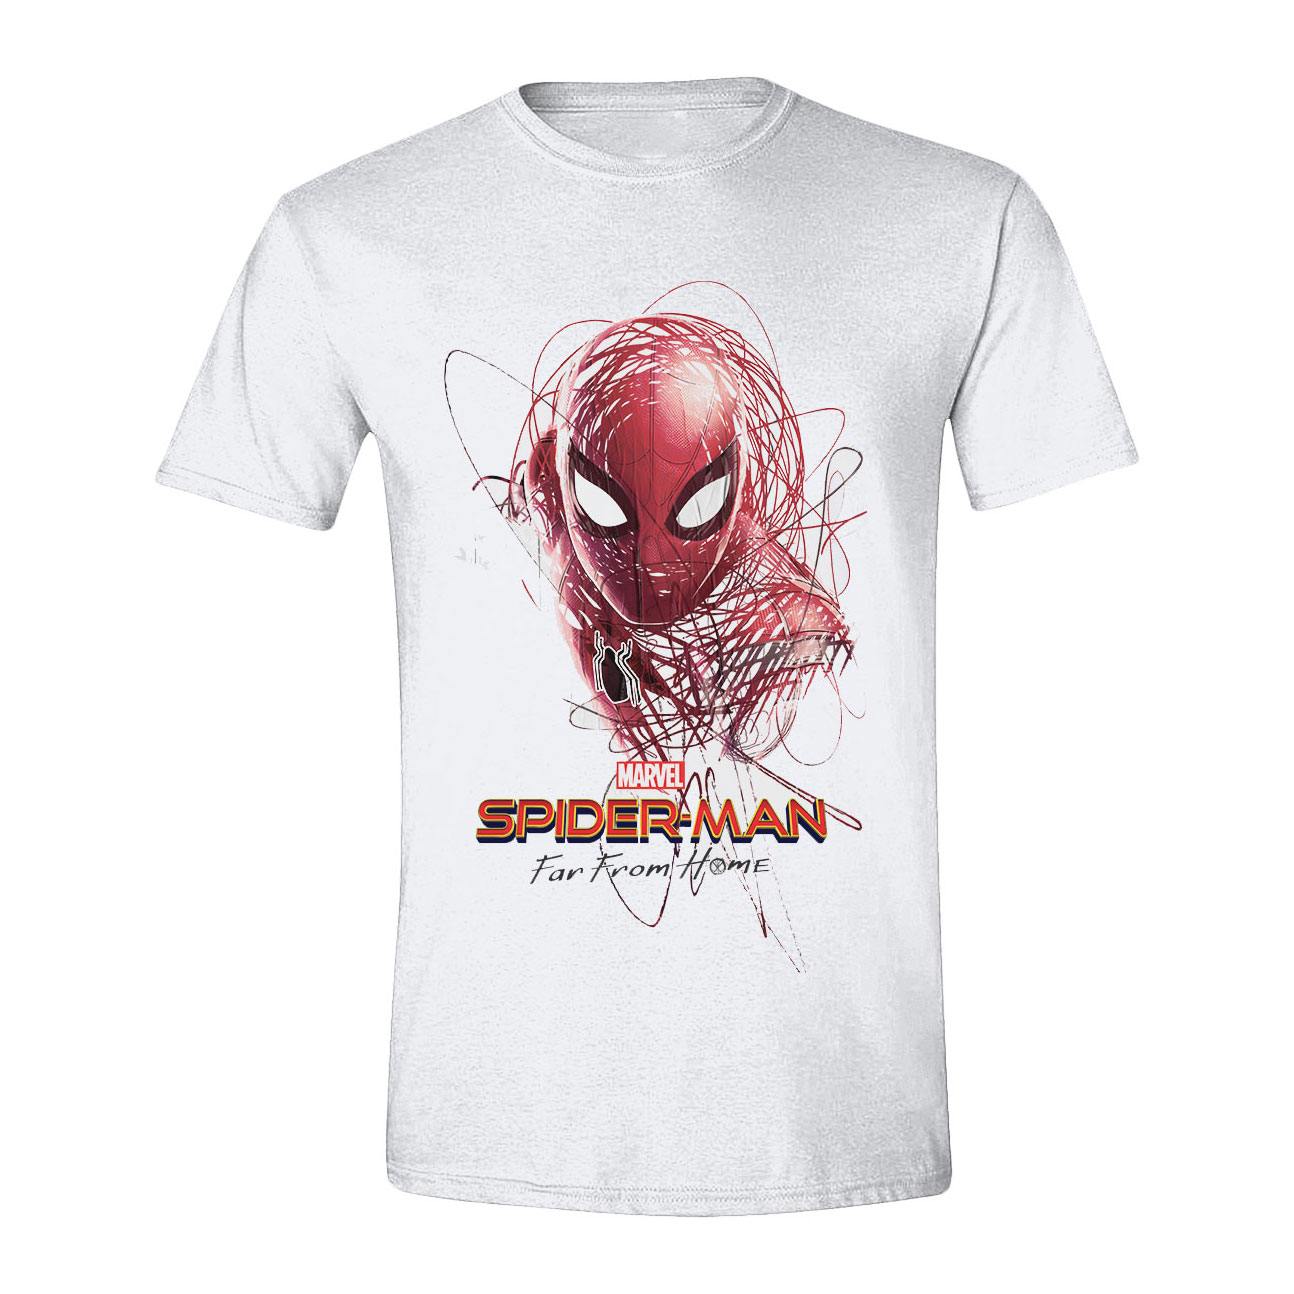 Spider-Man : Far From Home T-Shirt Sketched Hero (L)